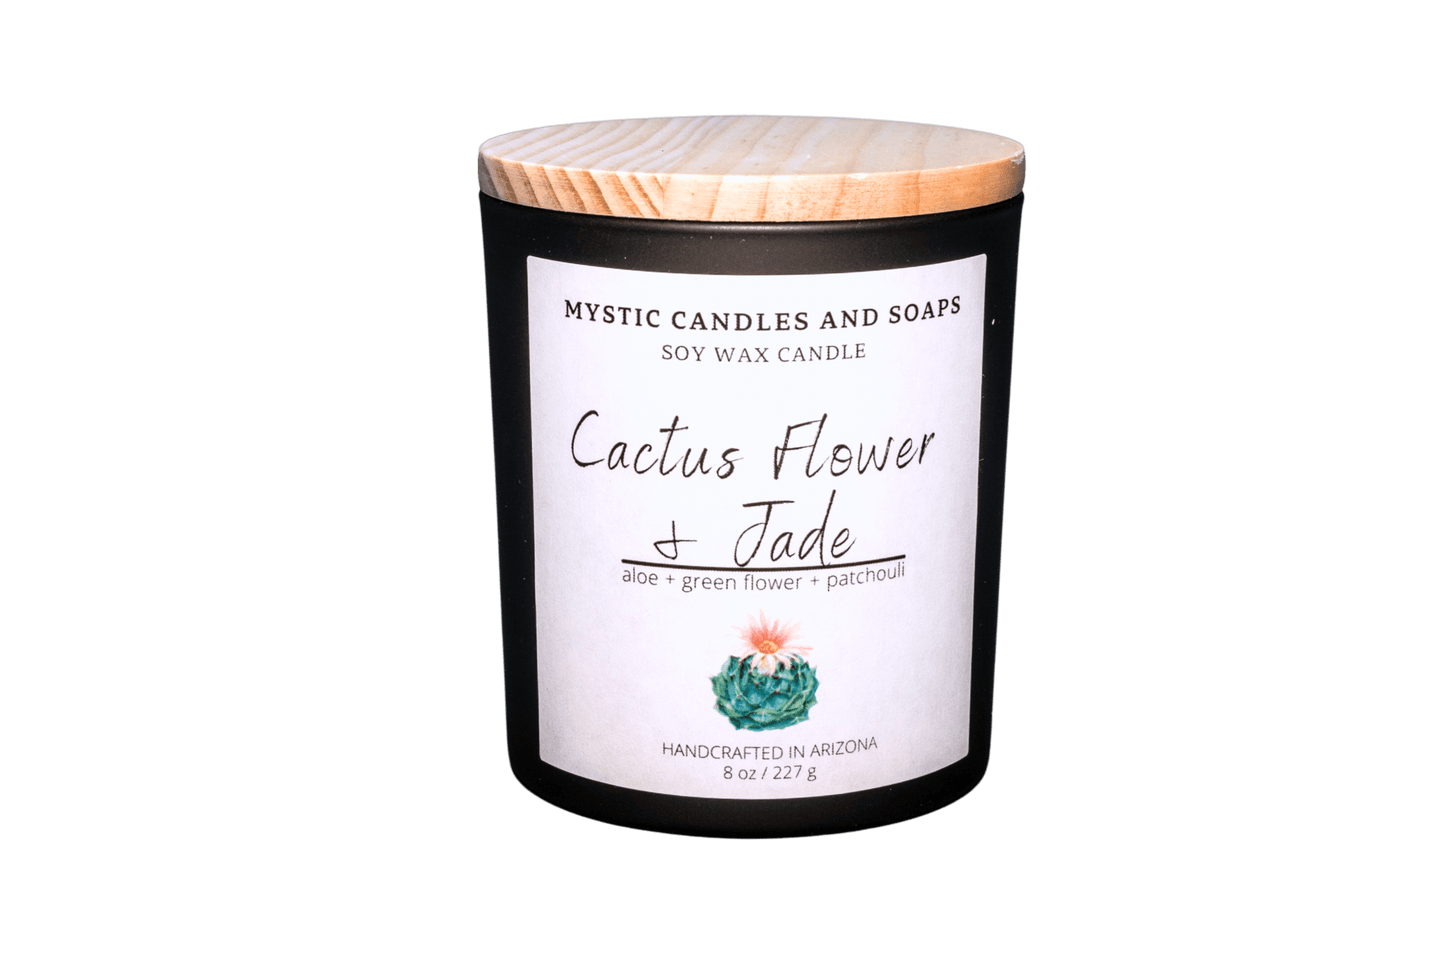 Cactus Flower and Jade, a best selling soy wax candle